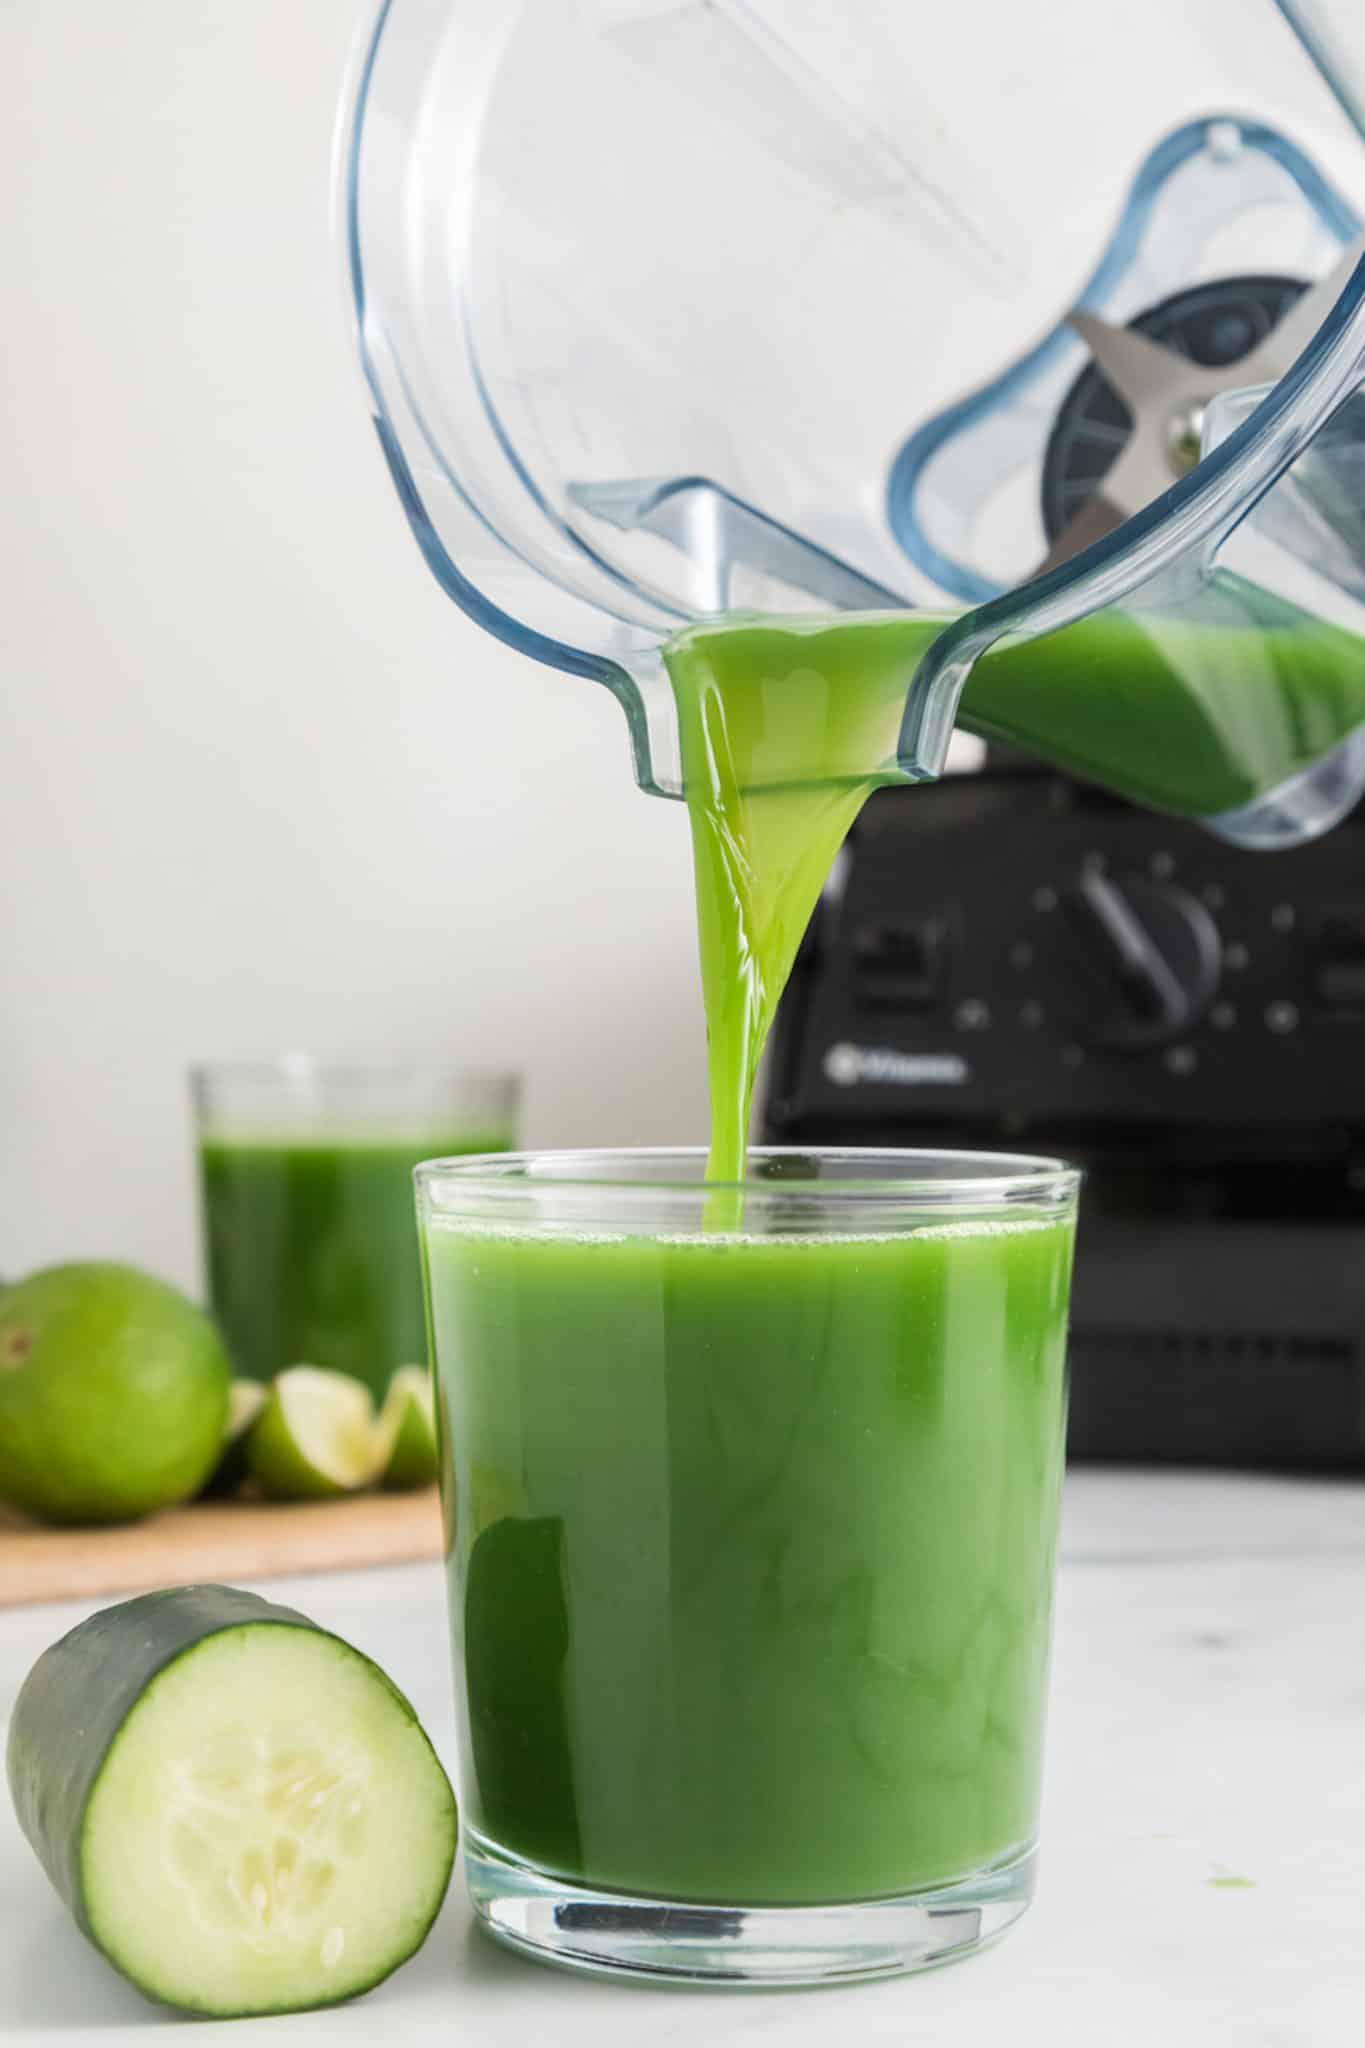 Cucumber juice being poured from a blender to a glass.